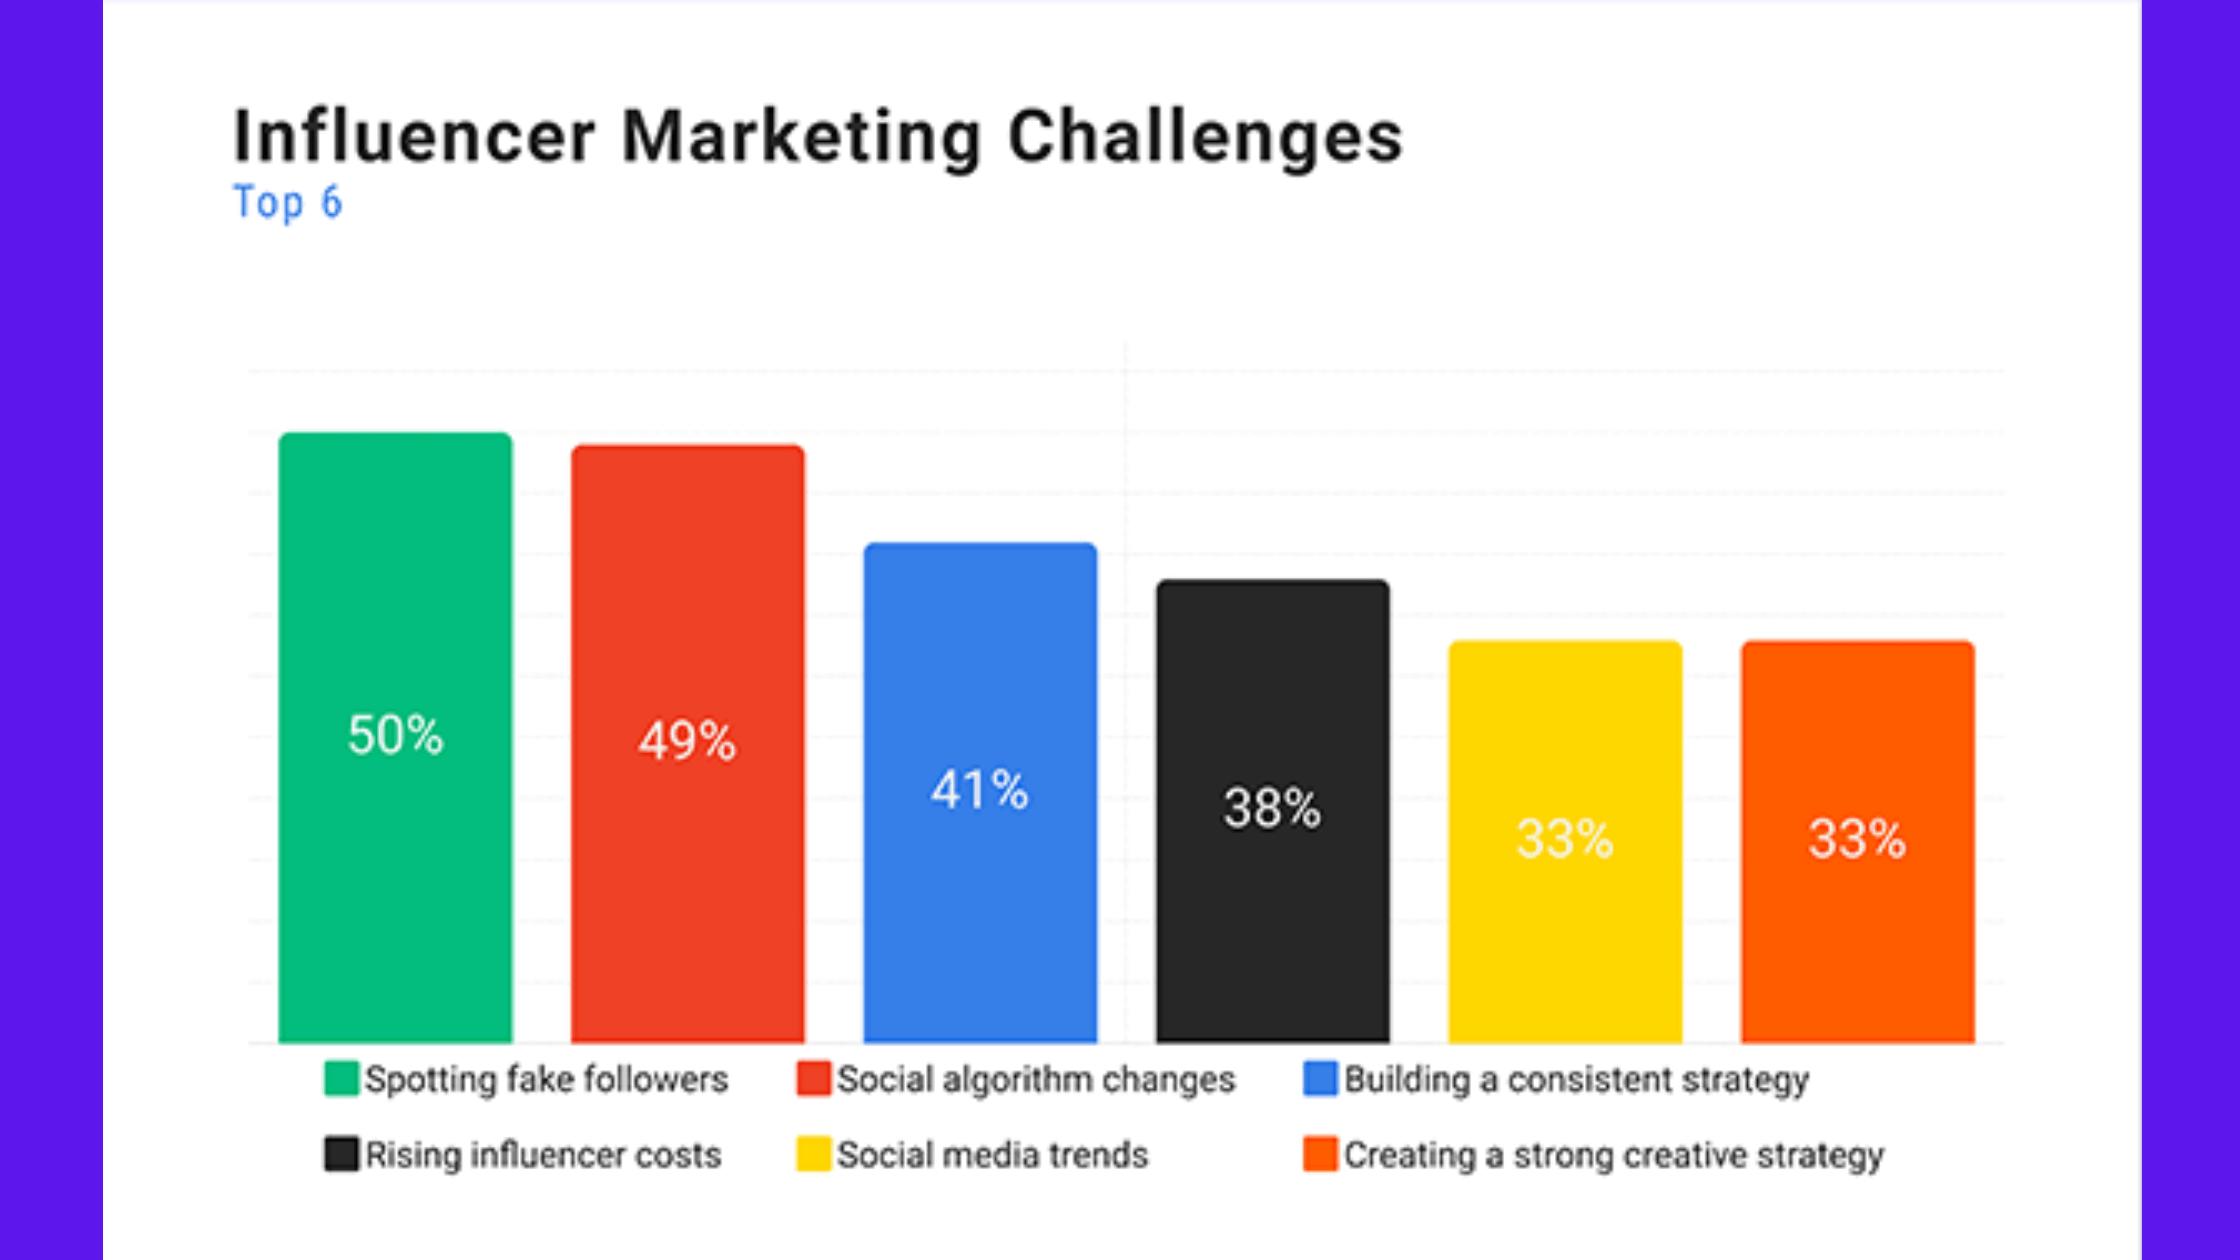 Why is Influencer Marketing so popular as a Side Hustle